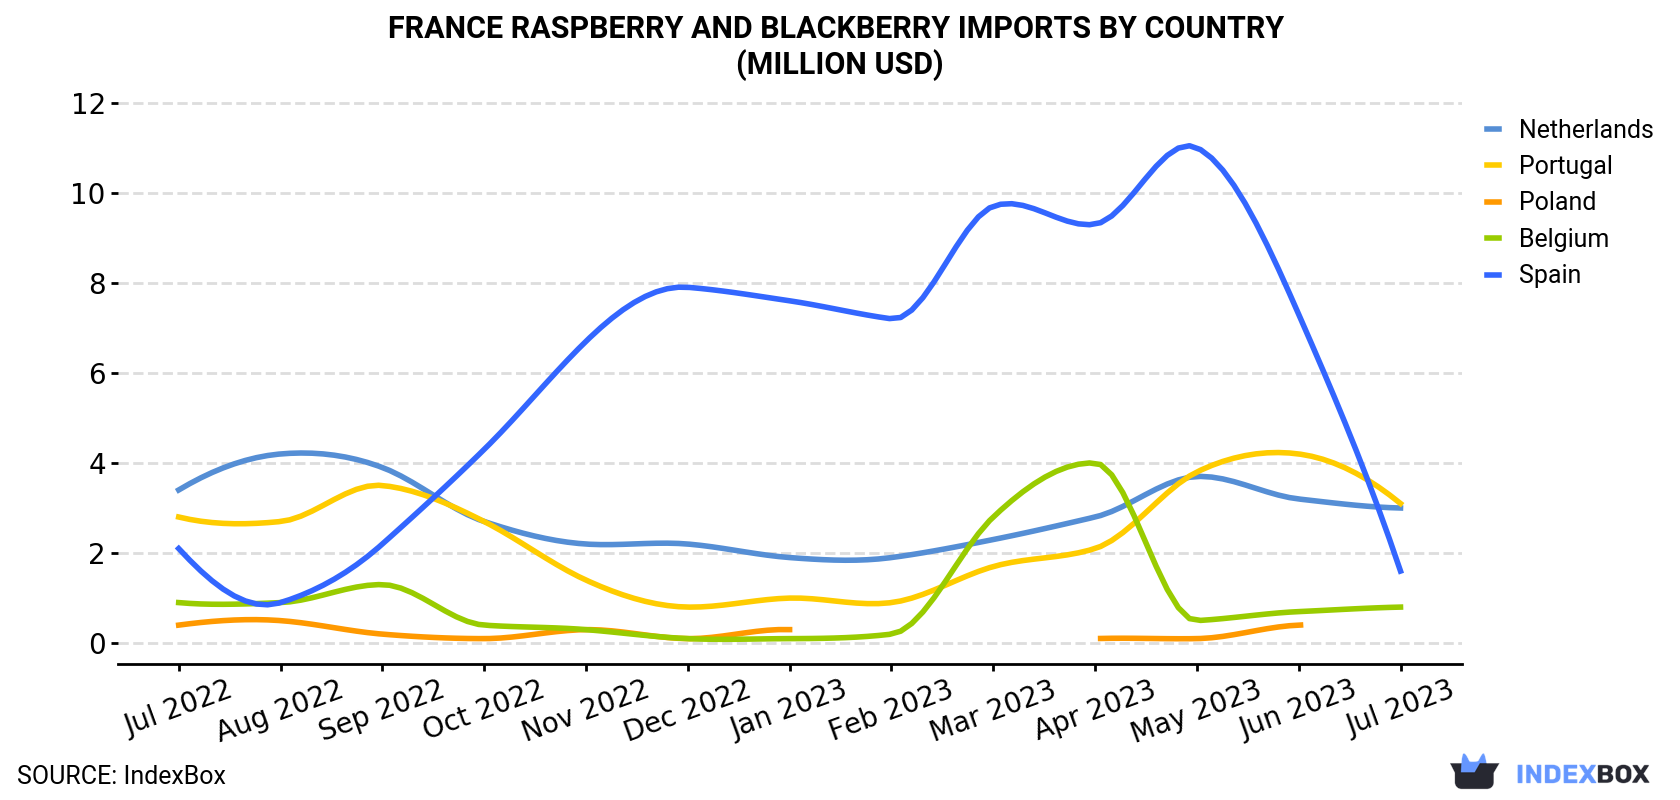 France Raspberry And Blackberry Imports By Country (Million USD)